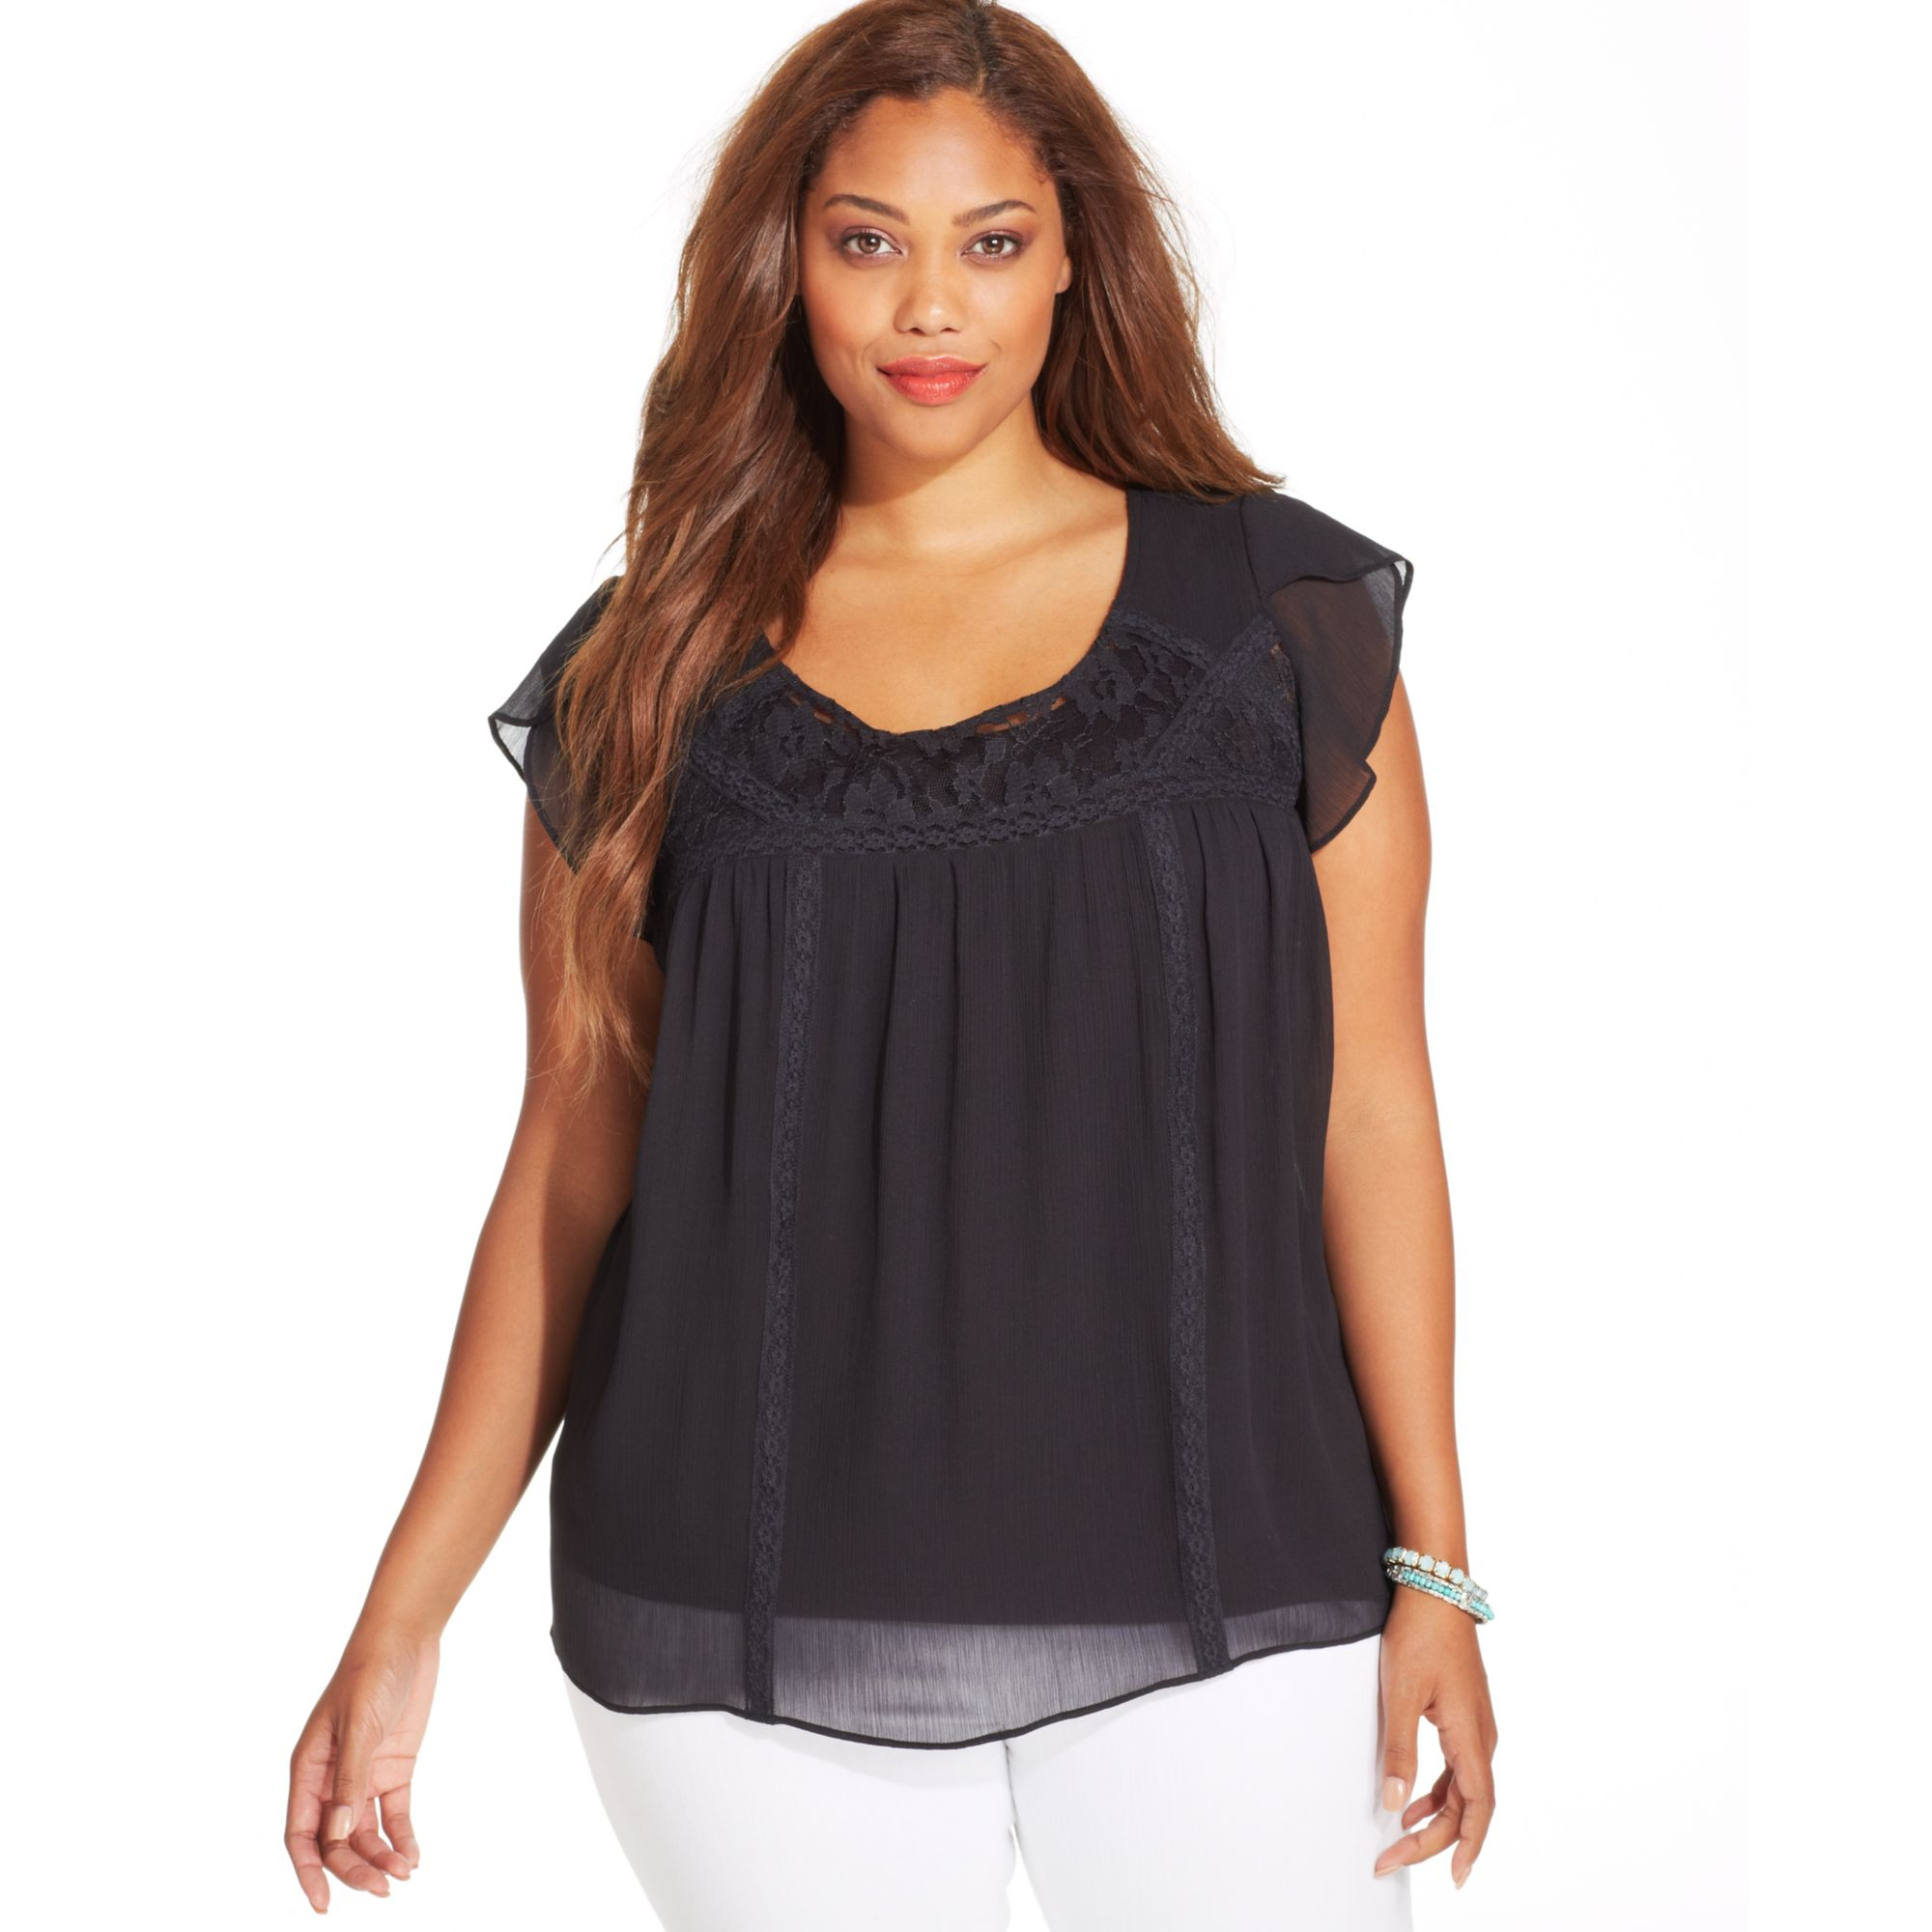 Lyst - Jessica Simpson Plus Size Short Sleeve Lace Peasant Top in Black